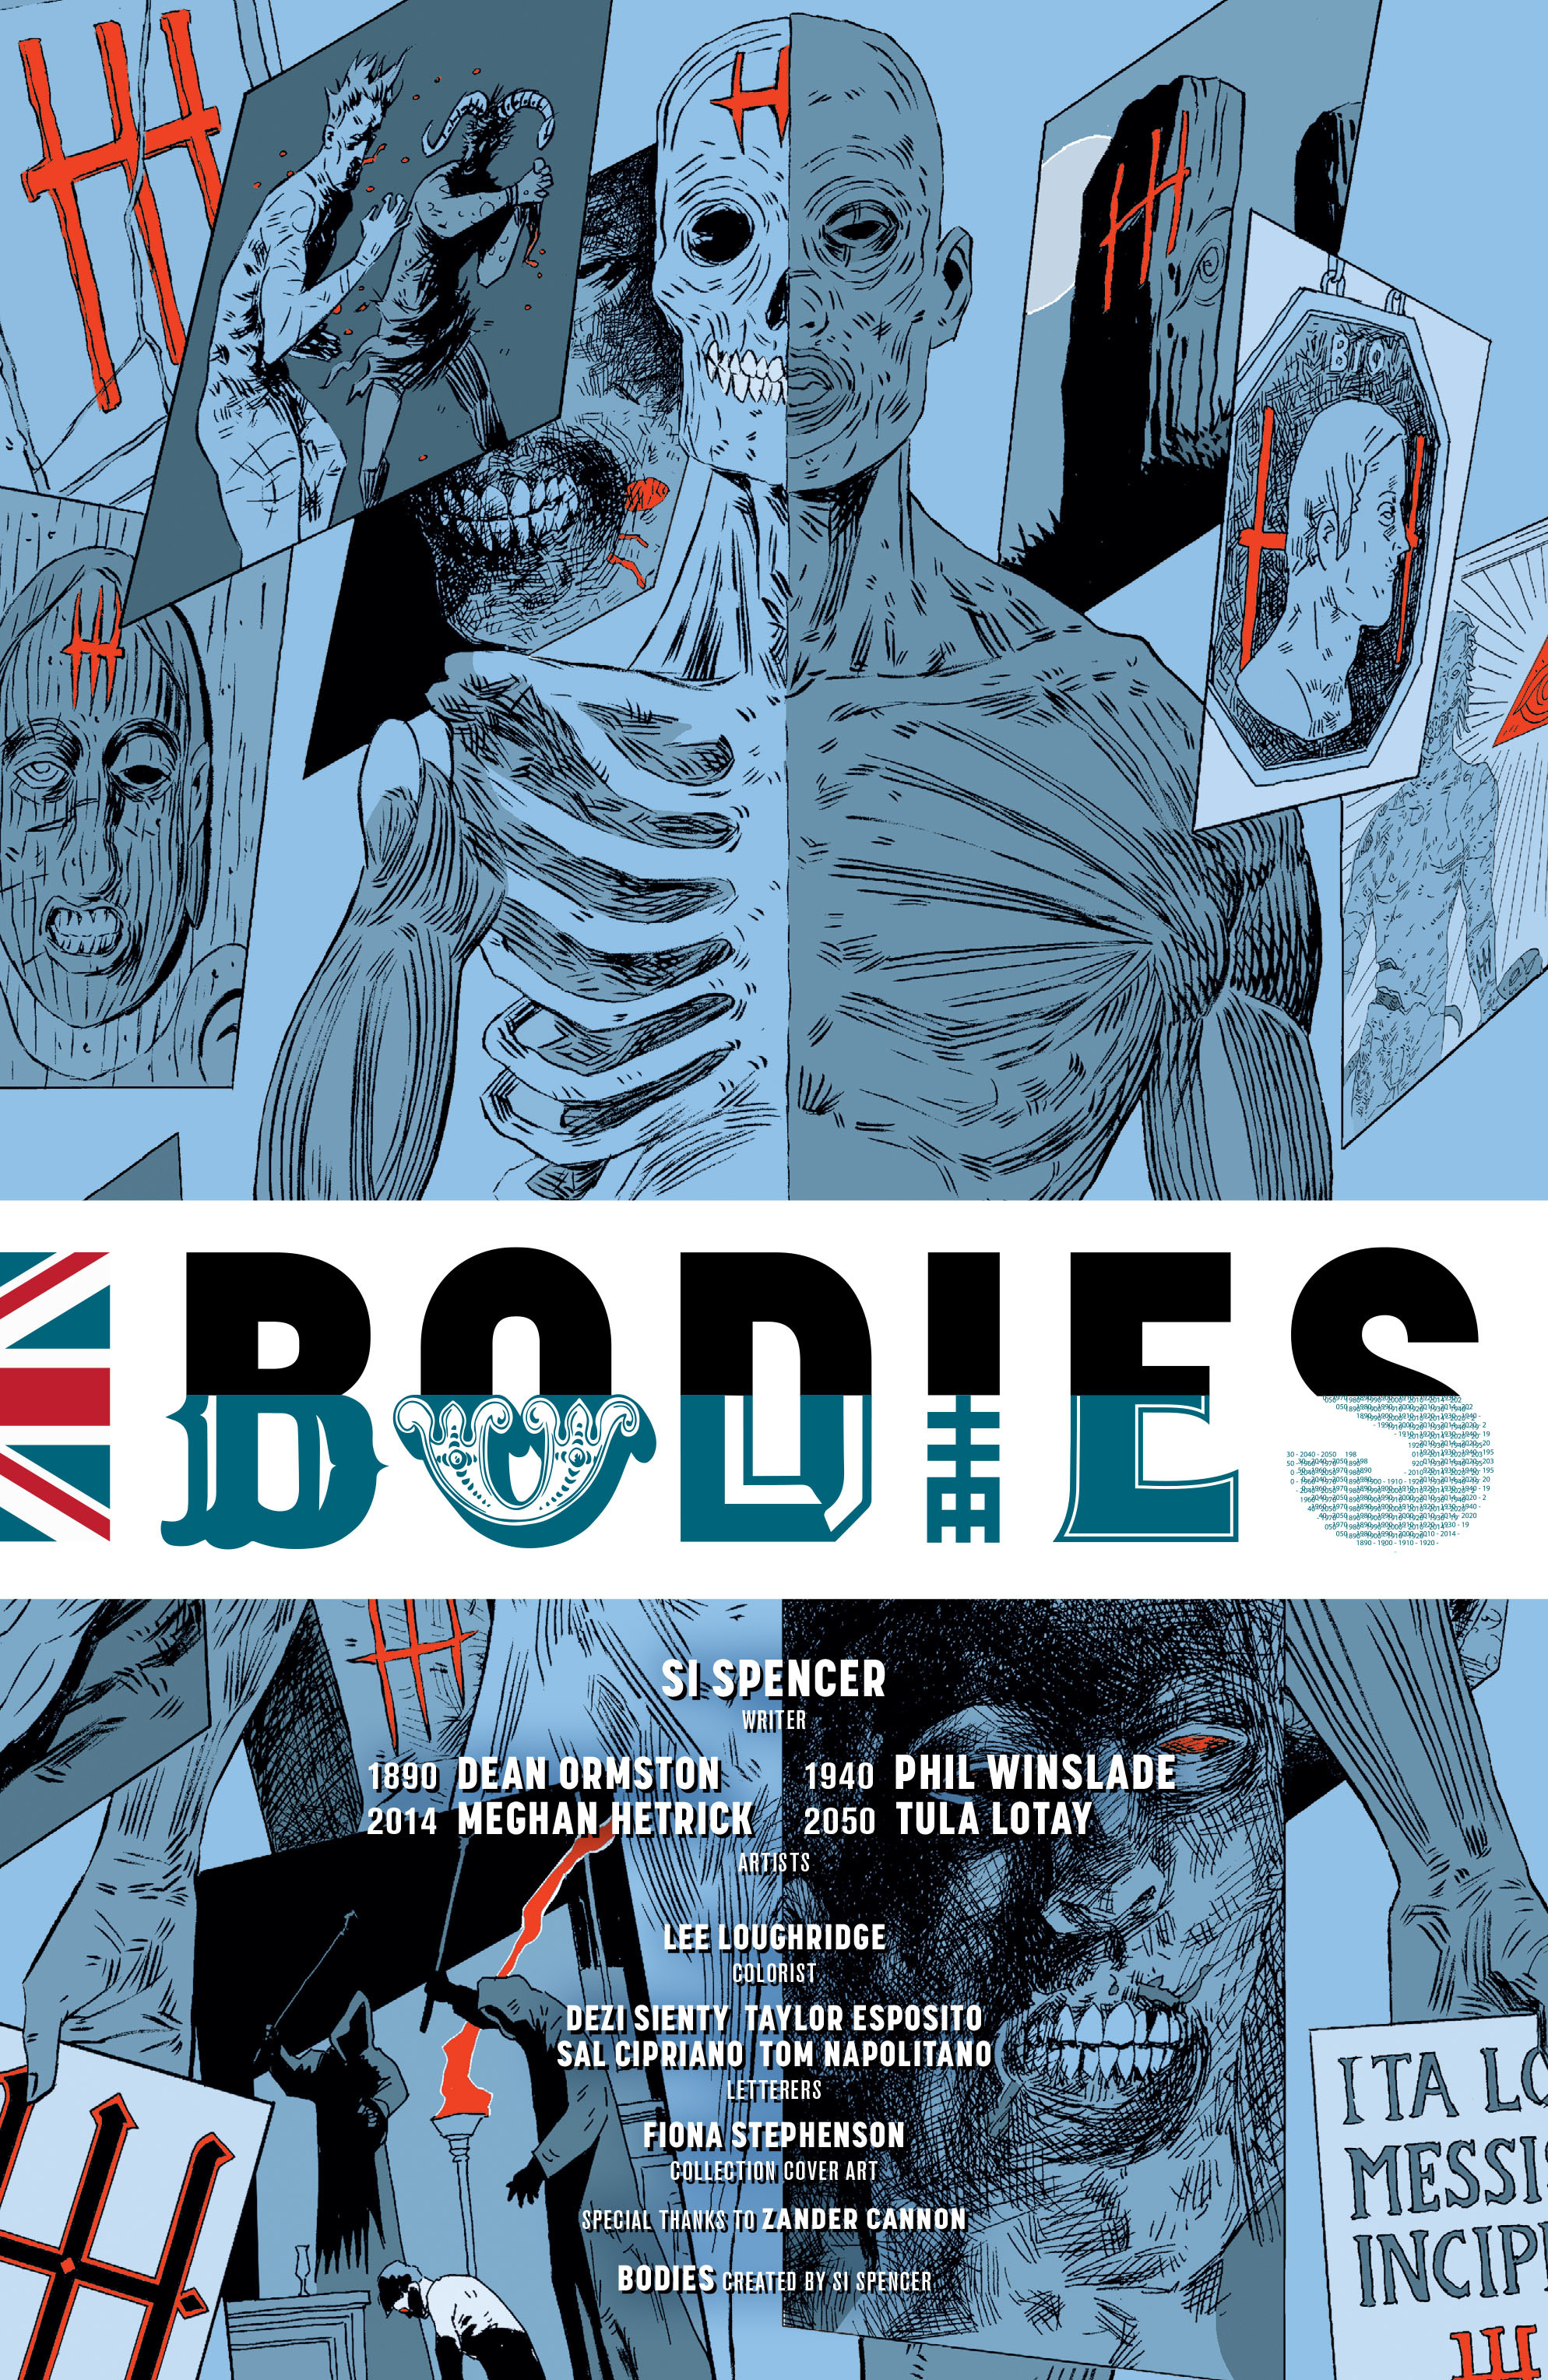 Read online Bodies comic -  Issue # TPB - 2